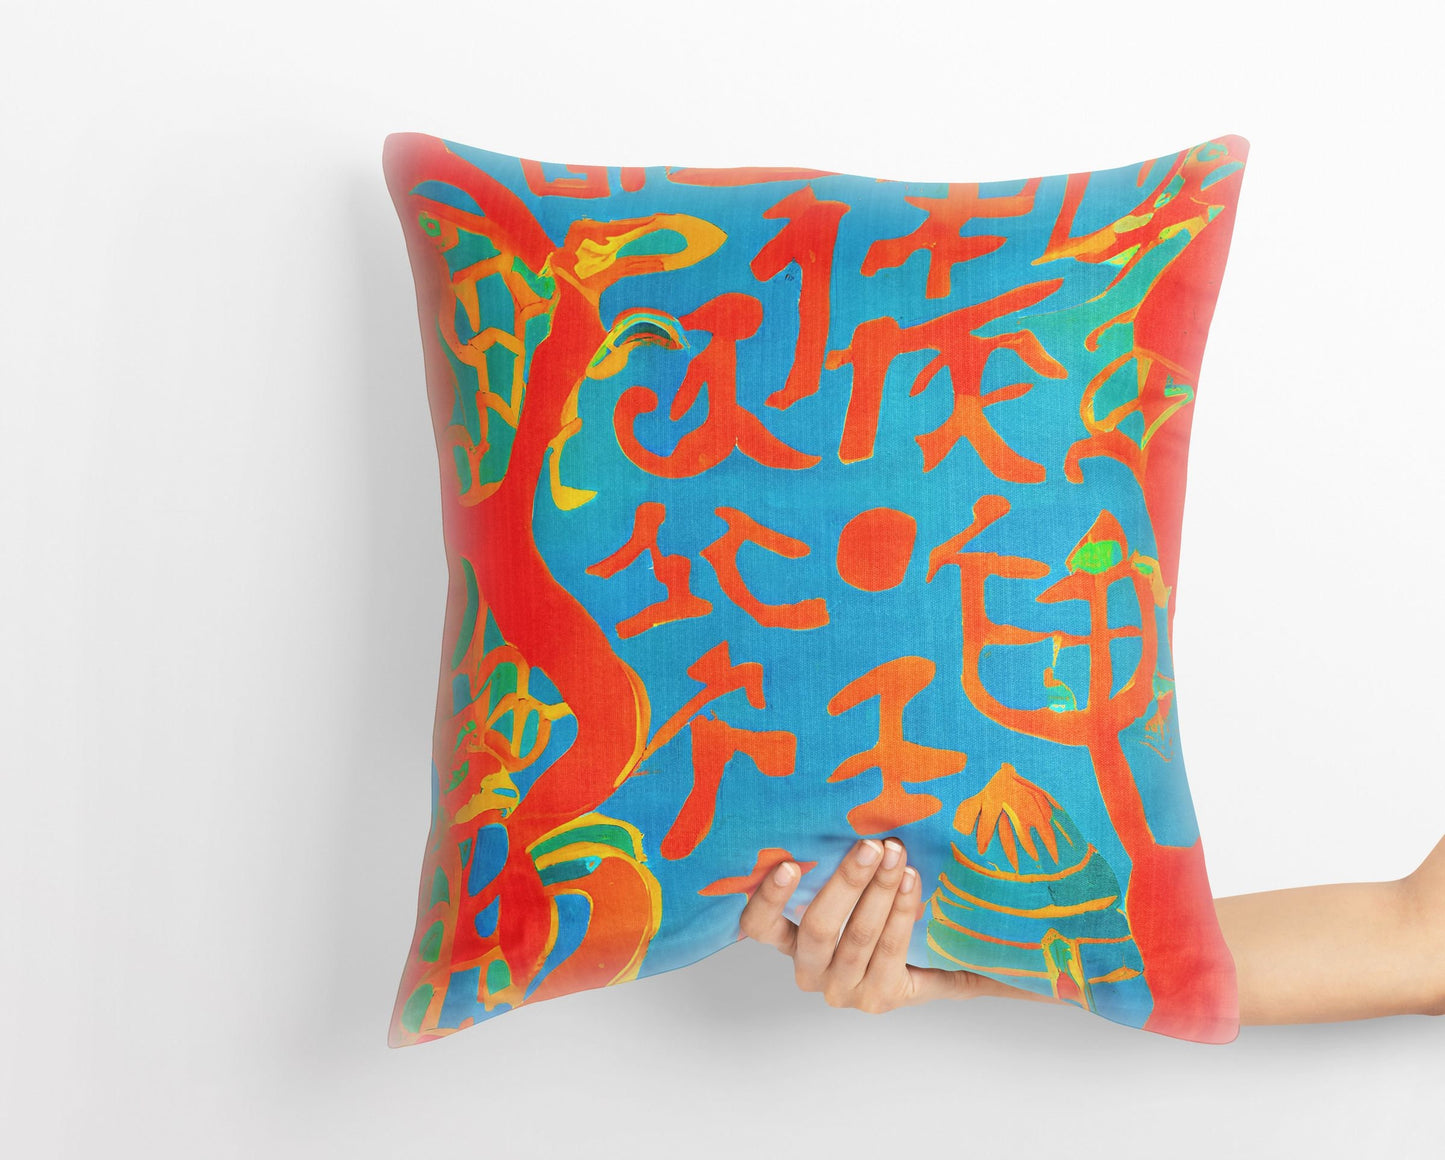 Symbols Of Ancient Chinese Culture, Throw Pillow Cover, Cat Pillow, Art Pillow, Colorful Pillow Case, Contemporary Pillow, Square Pillow